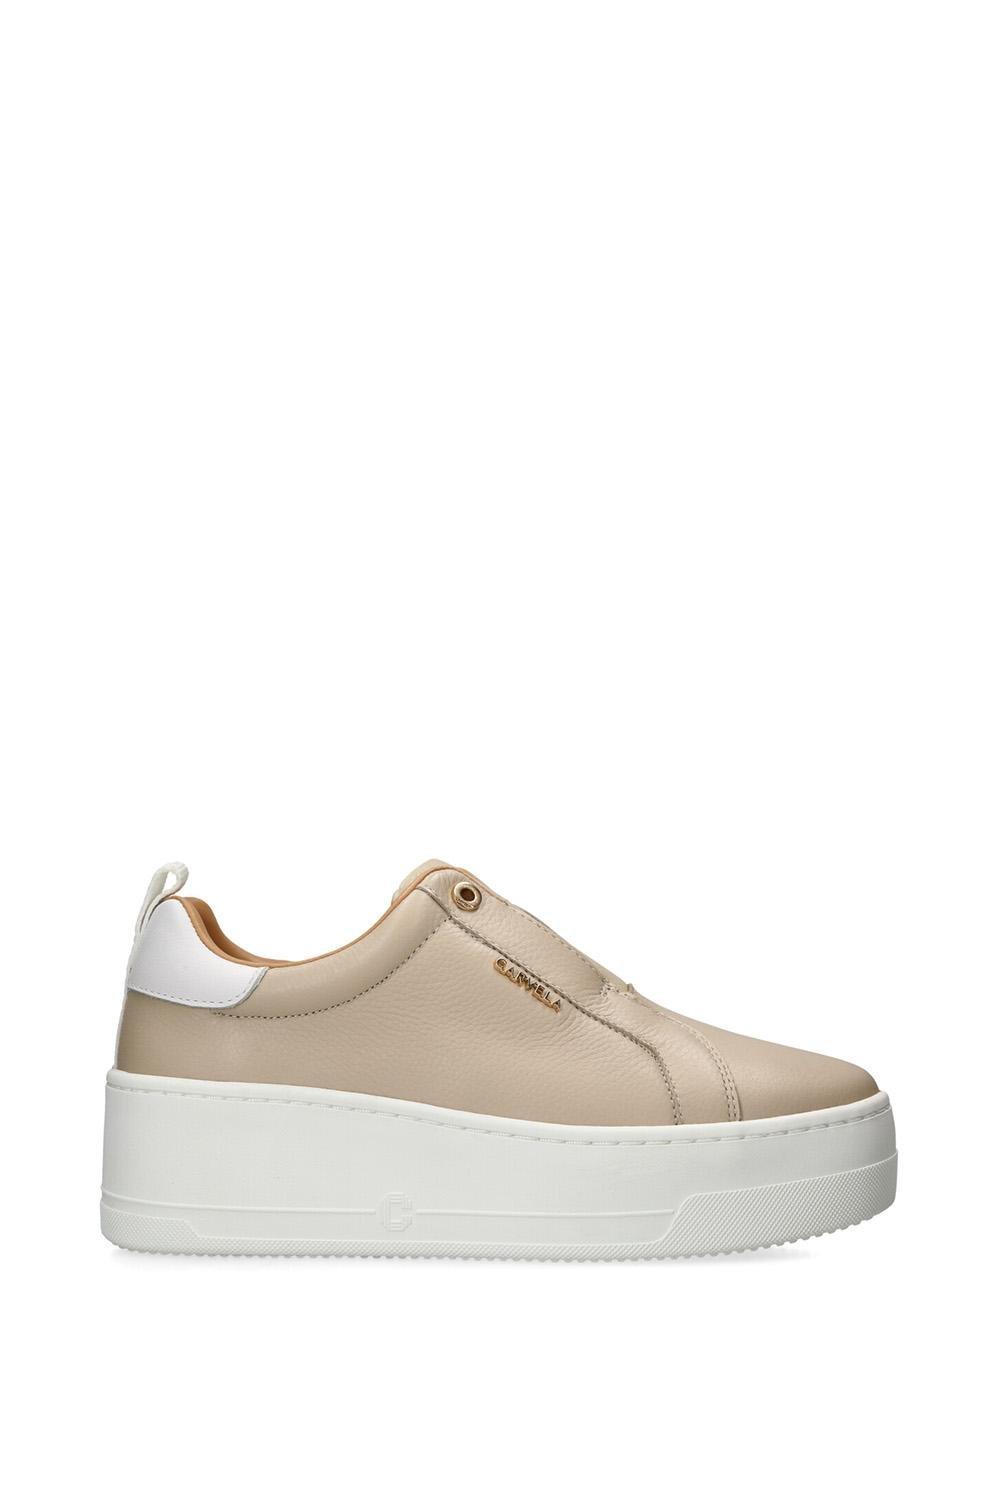 Кроссовки 'Connected Laceless' Leather Trainers Carvela, бежевый